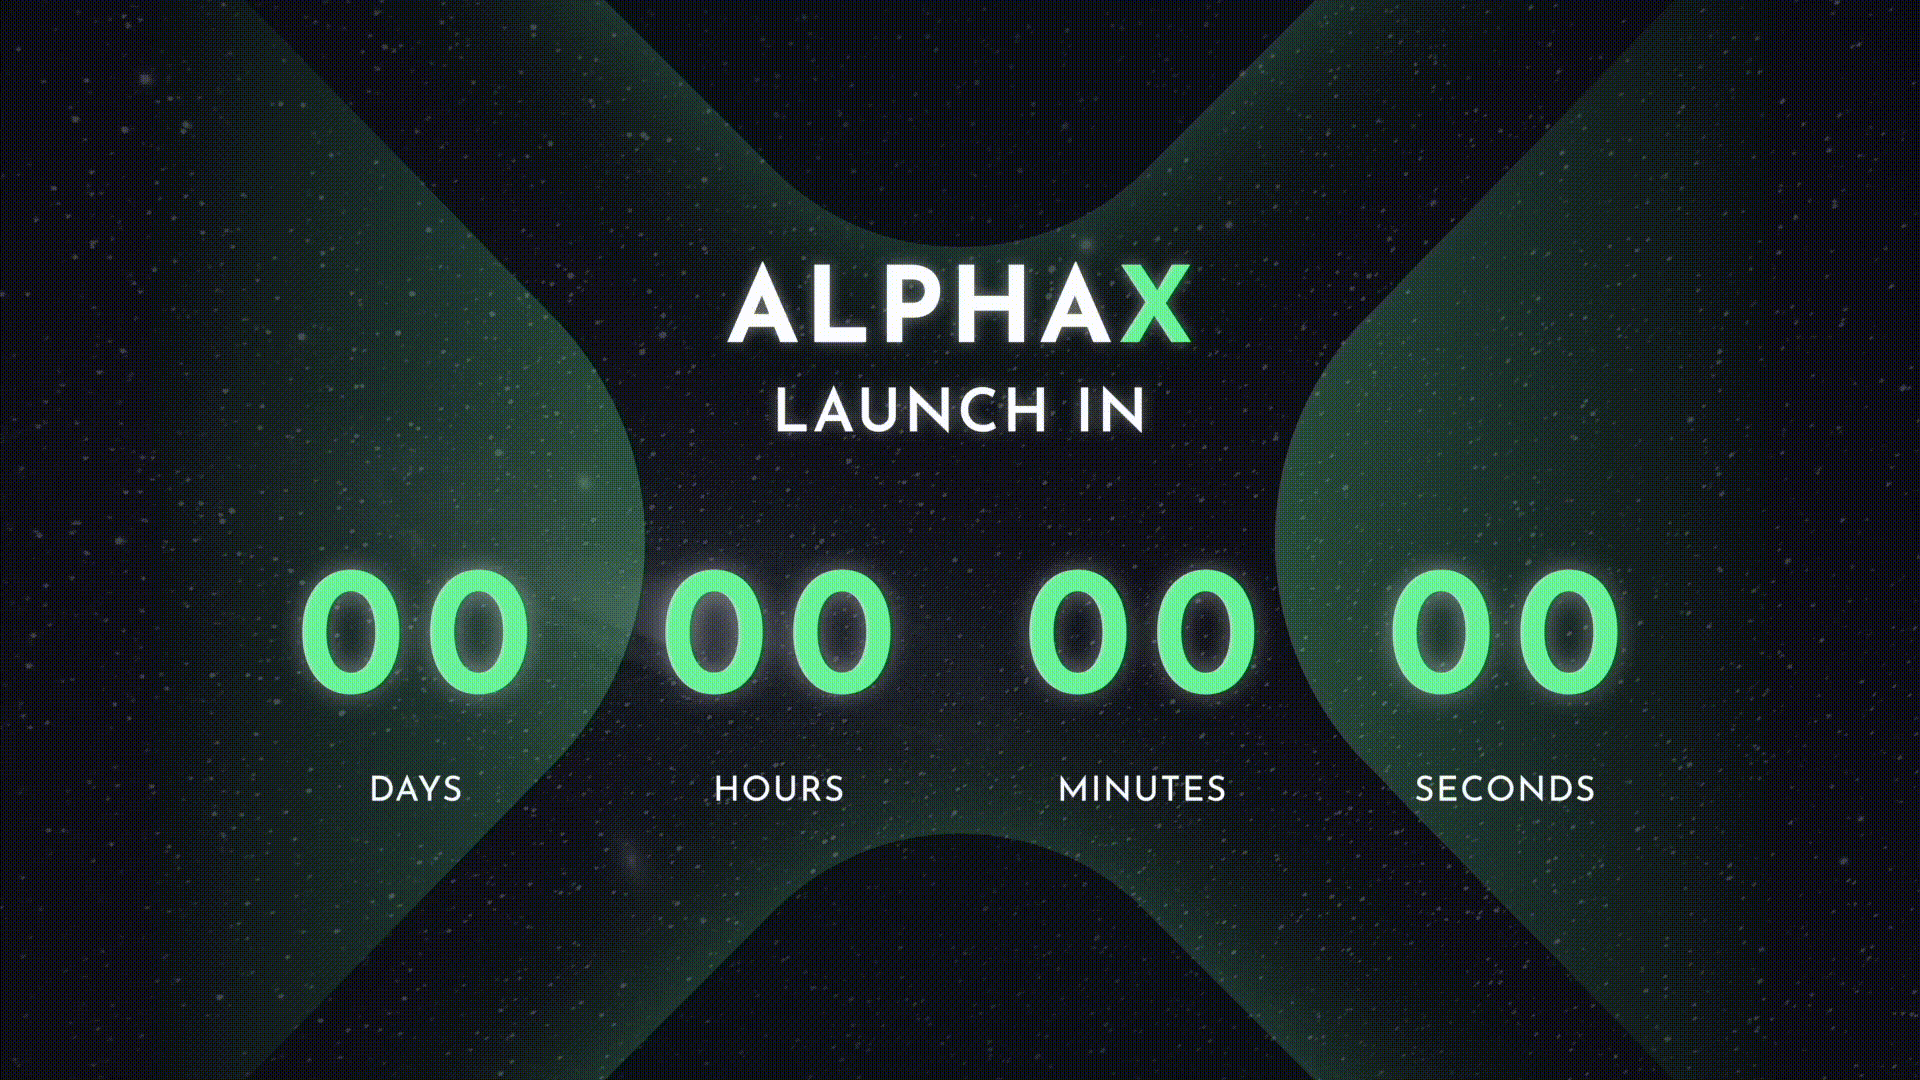 It’s Time for AlphaX